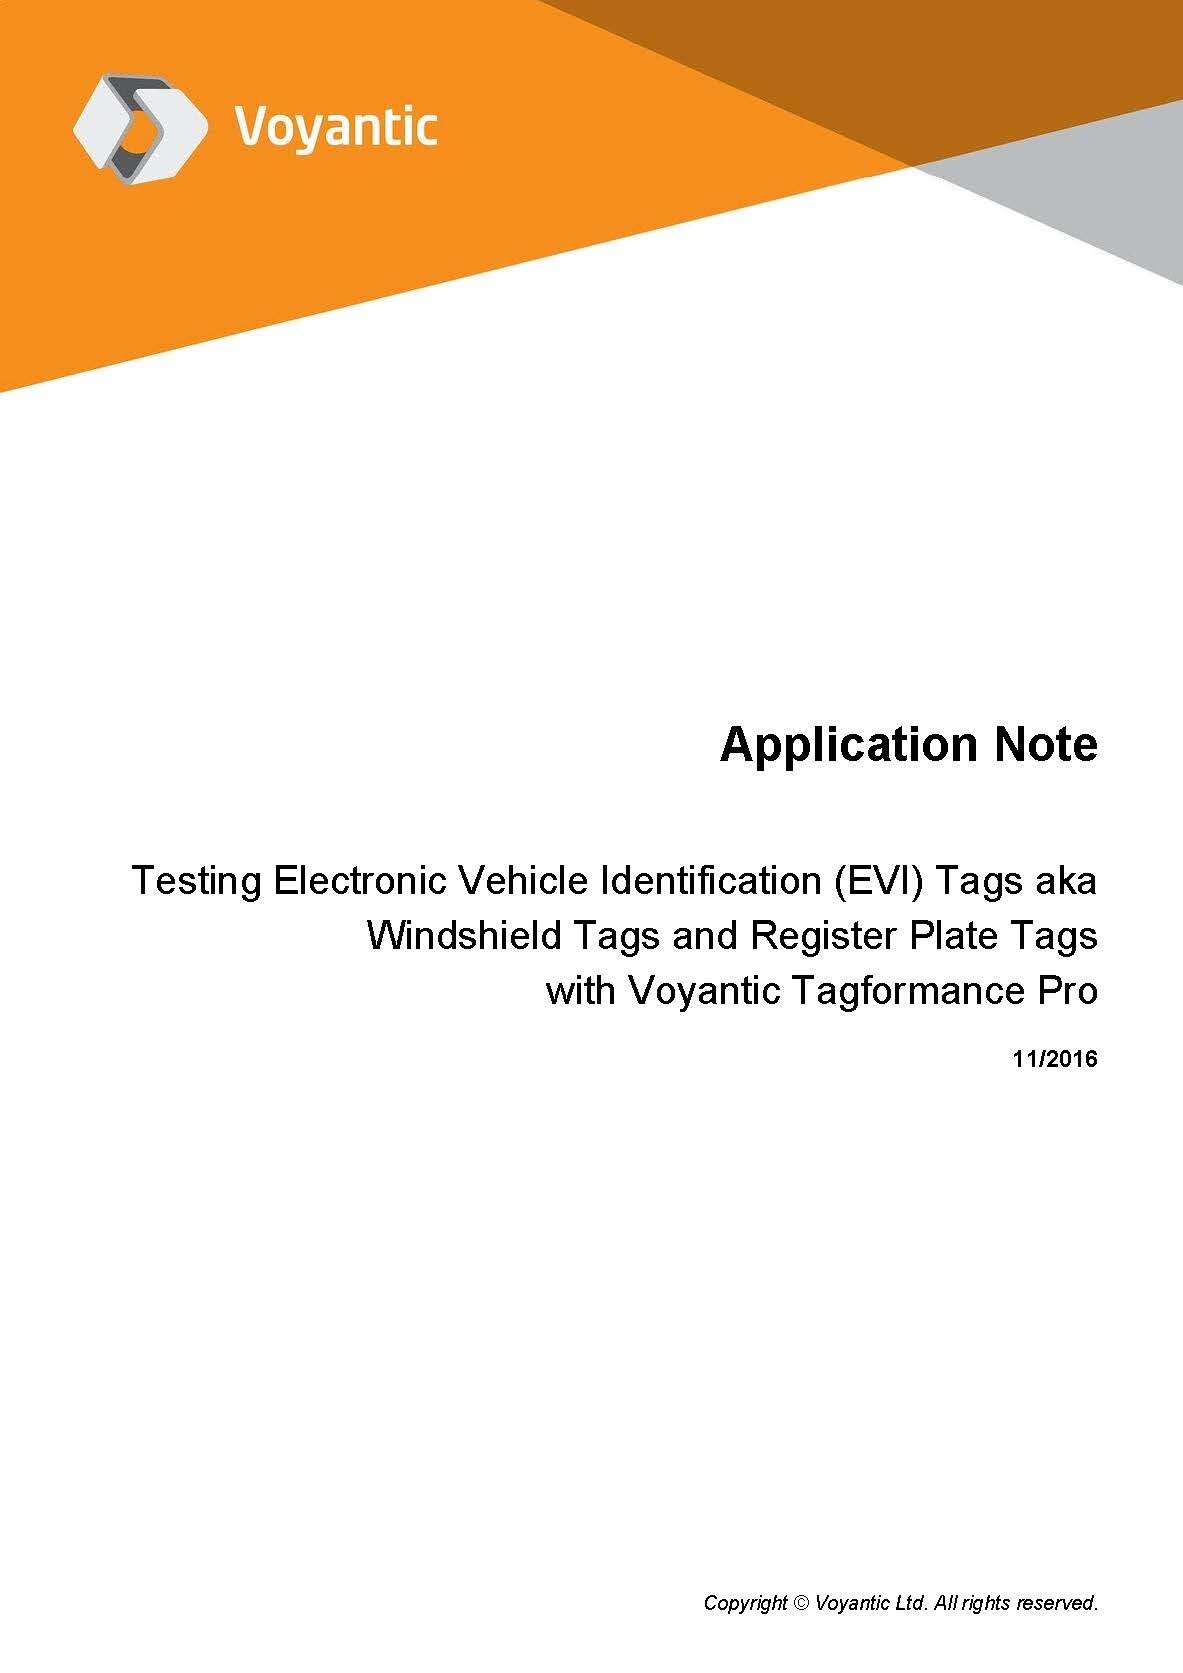 AppNote_Testing_EVI_Tags_with_Voyantic_Tagformance_Pro_Page_1